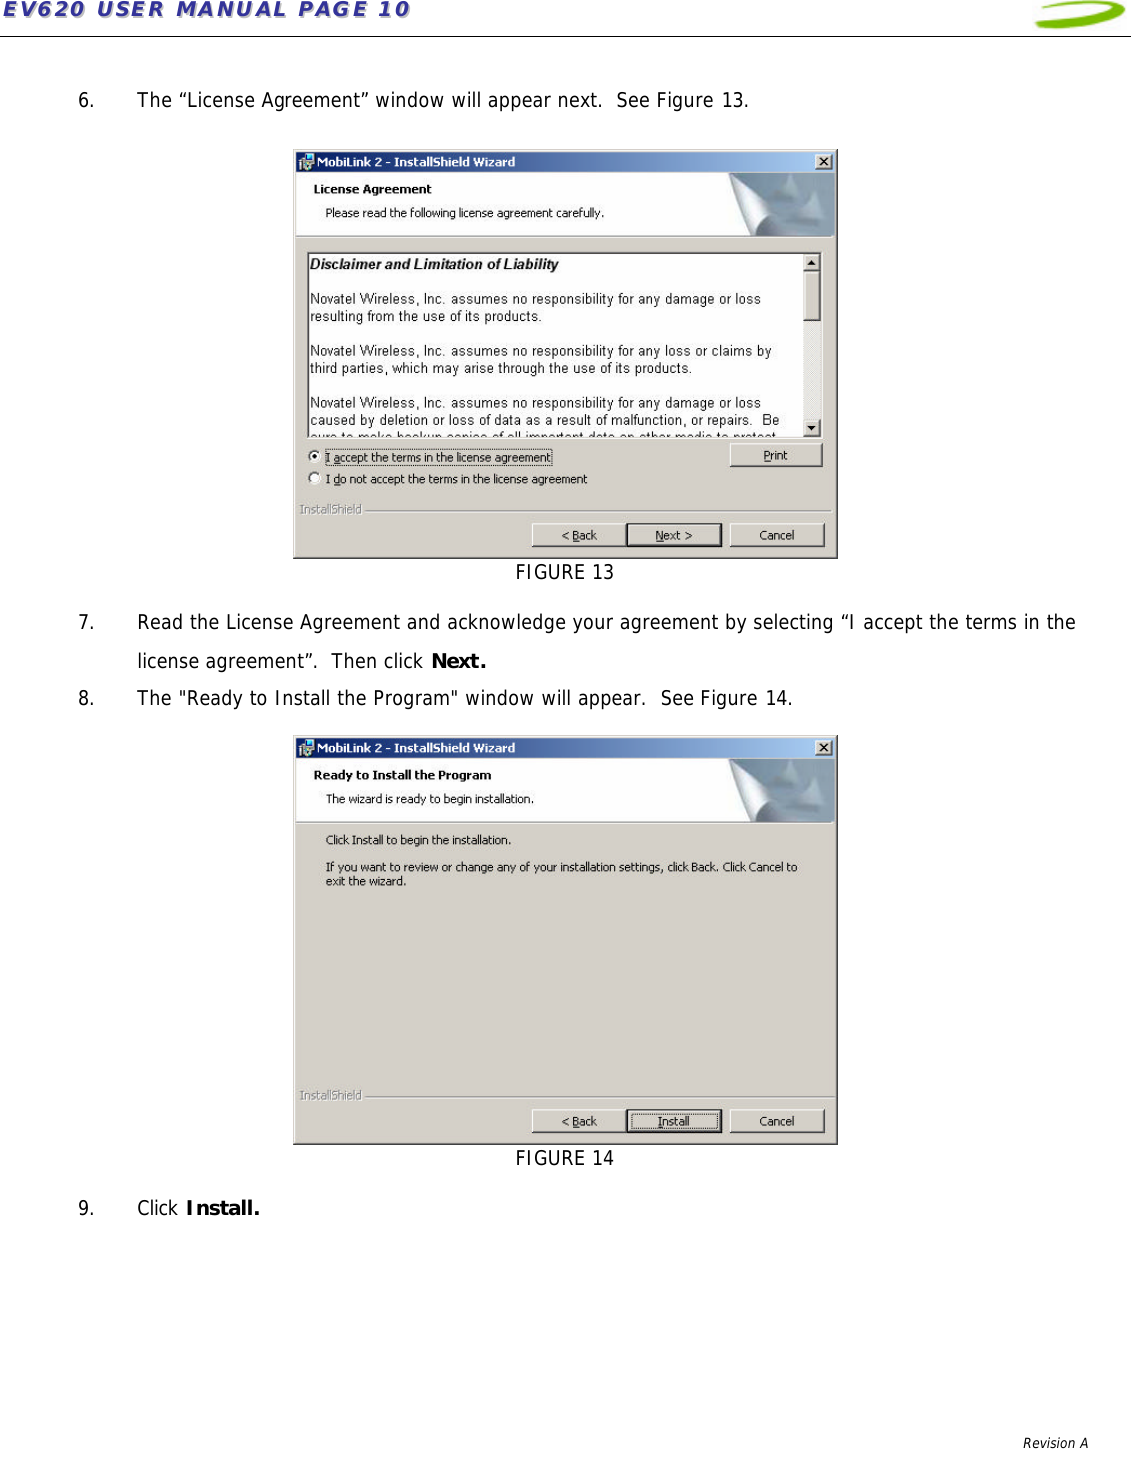 EEVV662200  UUSSEERR  MMAANNUUAALL  PPAAGGEE  1100              Revision A     6. The “License Agreement” window will appear next.  See Figure 13.   FIGURE 13  7. Read the License Agreement and acknowledge your agreement by selecting “I accept the terms in the license agreement”.  Then click Next. 8. The &quot;Ready to Install the Program&quot; window will appear.  See Figure 14.   FIGURE 14  9. Click Install.  